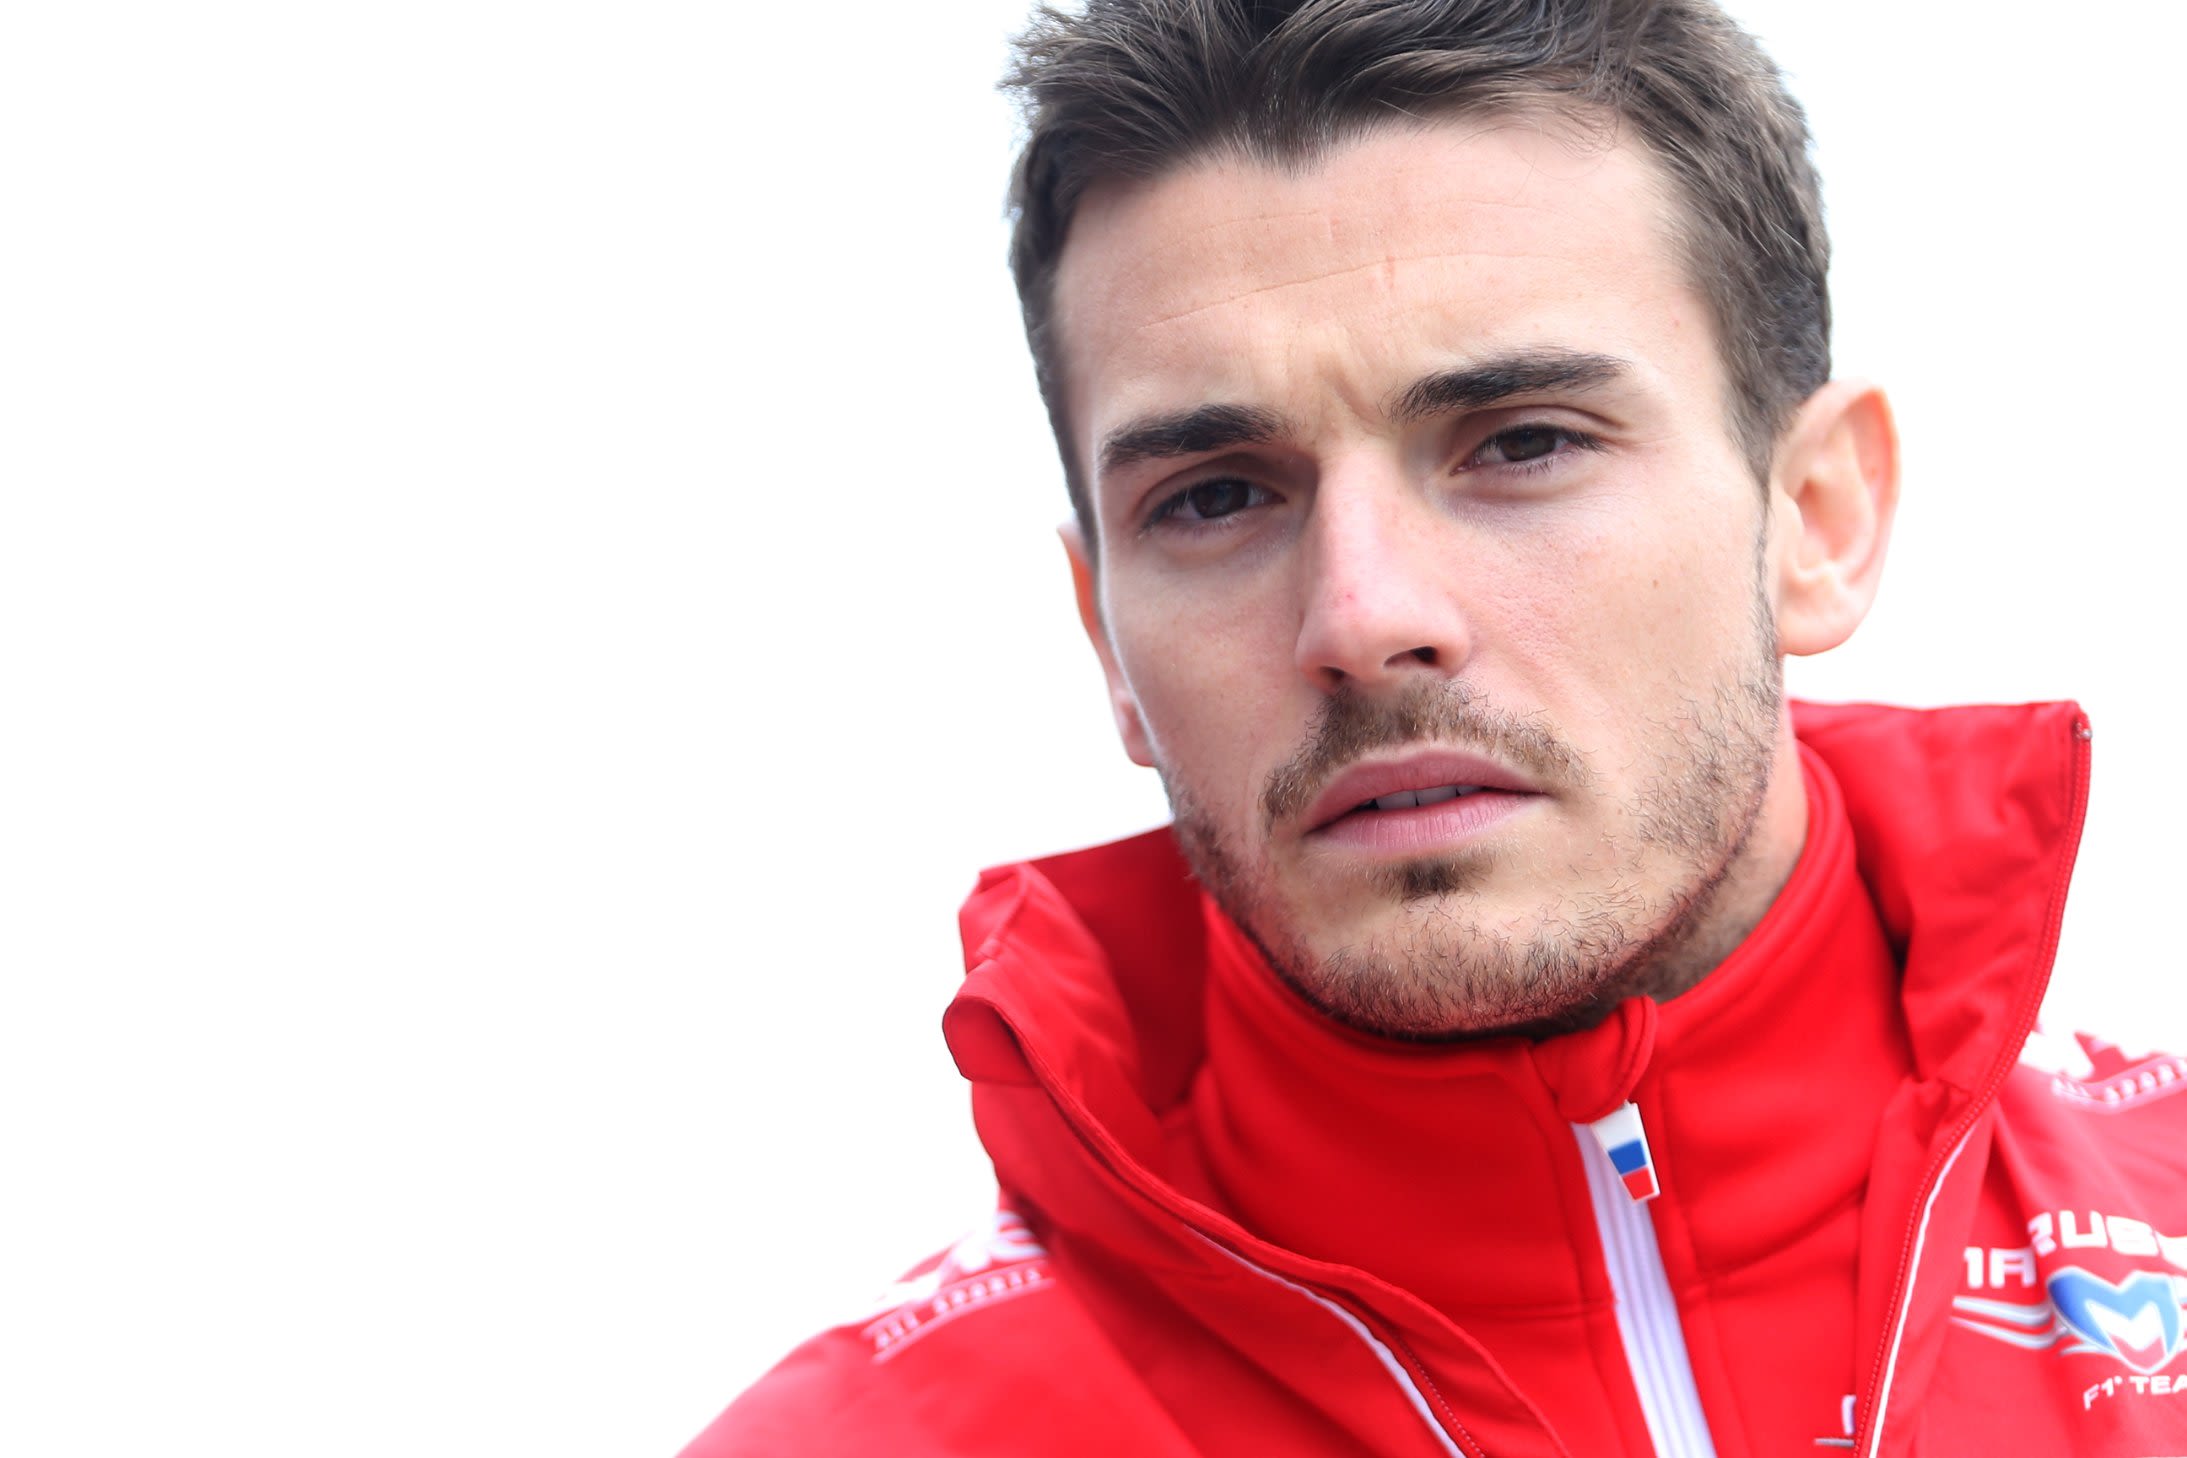 The world of Formula One was shocked by the death of popular French racer Jules Bianchi after he suffered a serious head injury during a crash nine months earlier at the Japanese Grand Prix on October 5, 2014.